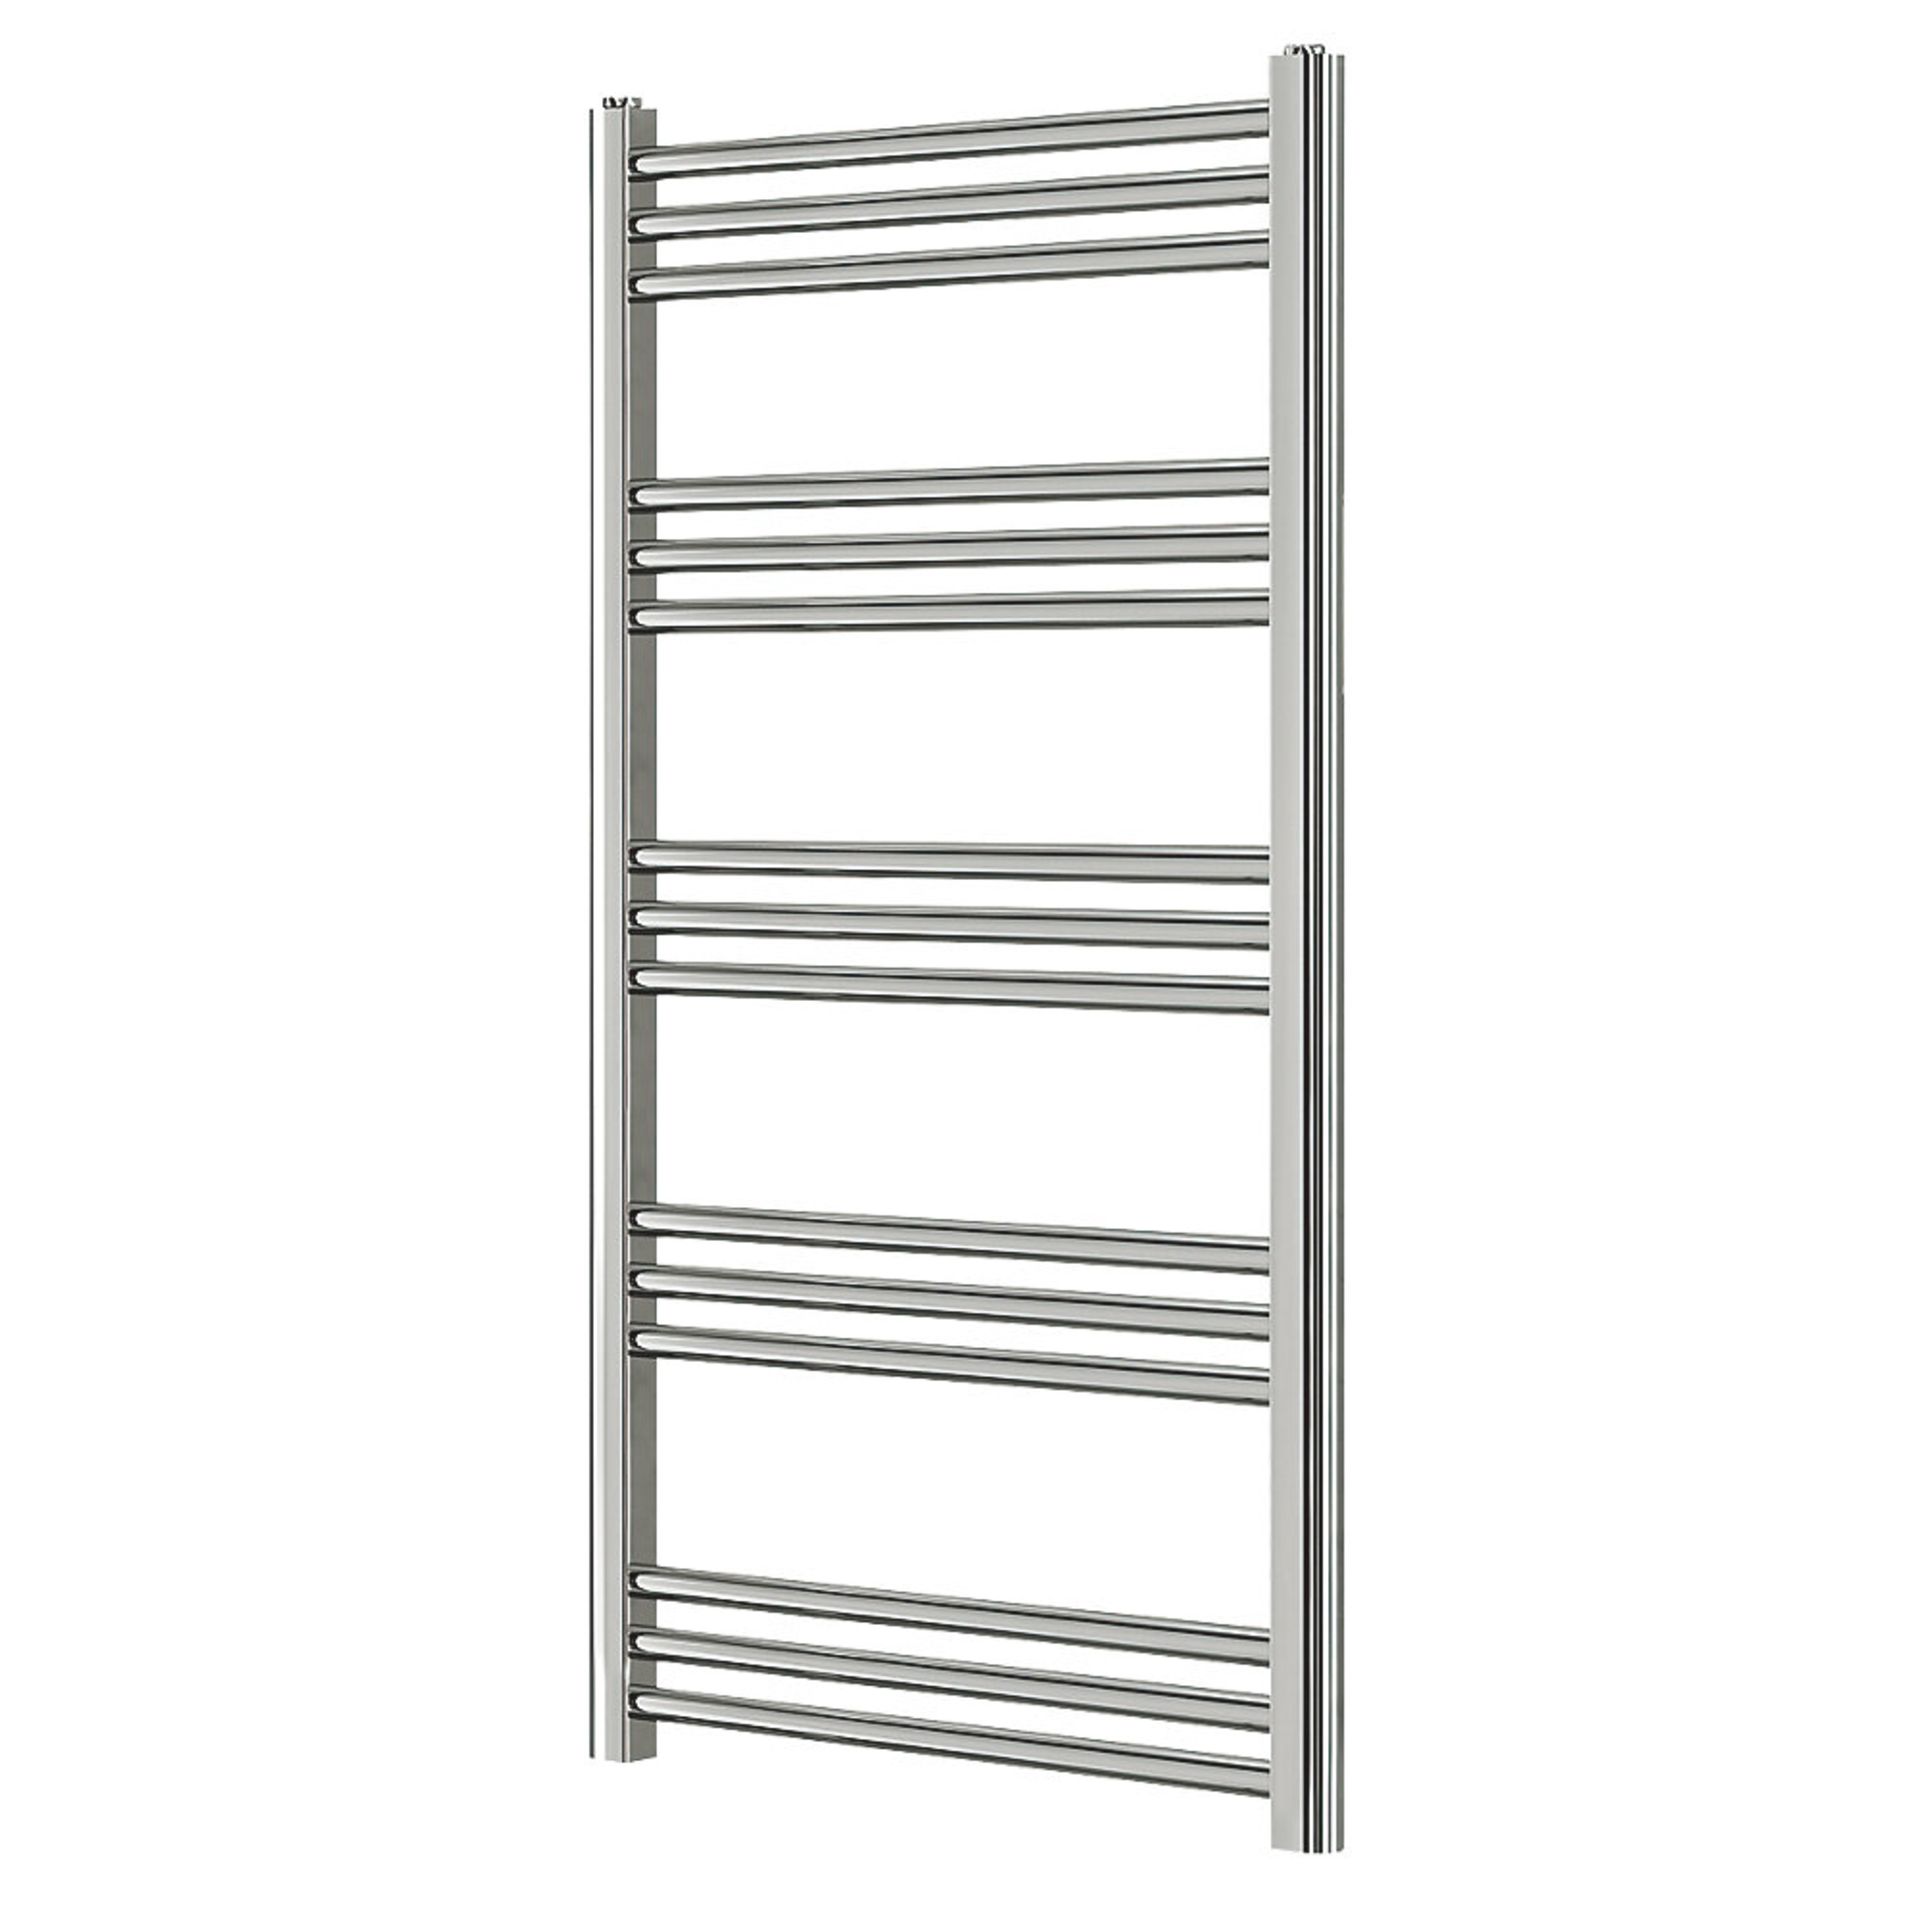 (QQ54) 1100x500mm Flat Chrome Towel Radiator. RRP £164.99. Mild steel construction with a - Image 2 of 2